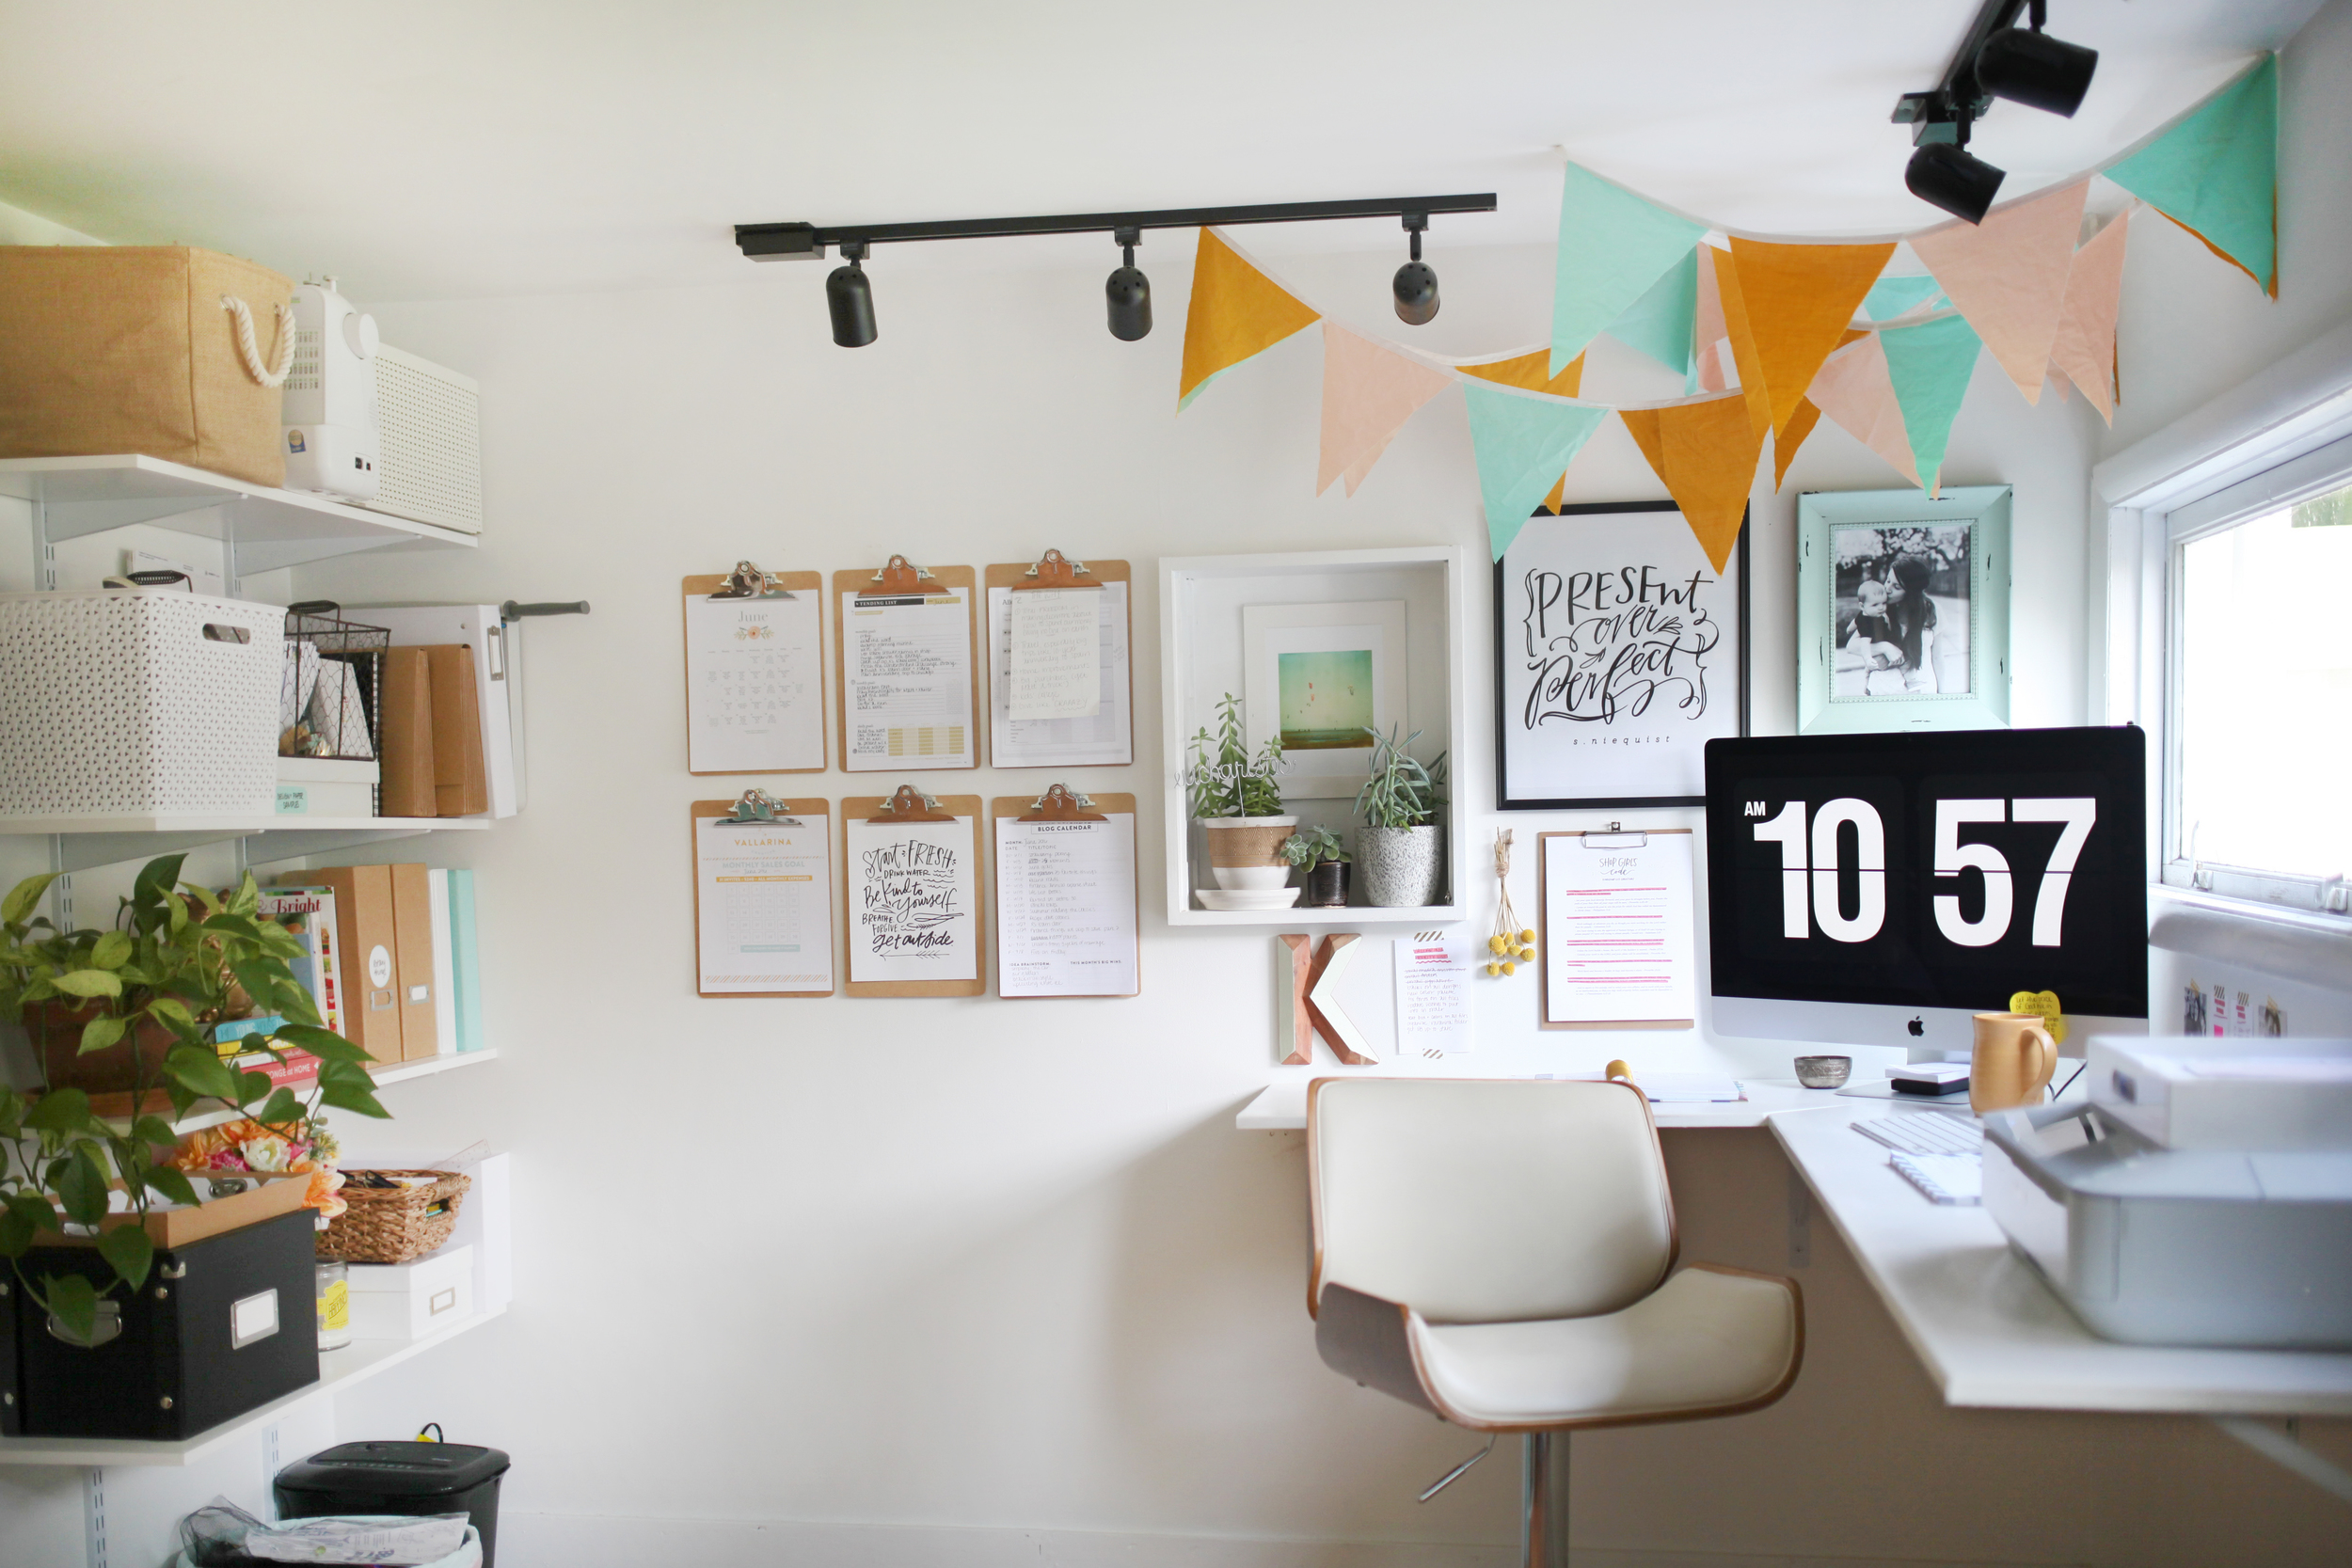  Home office design inspiration - The School of Styling Office Tours - Noblesville, Indiana - Small business owners - Vallarina Creative -  